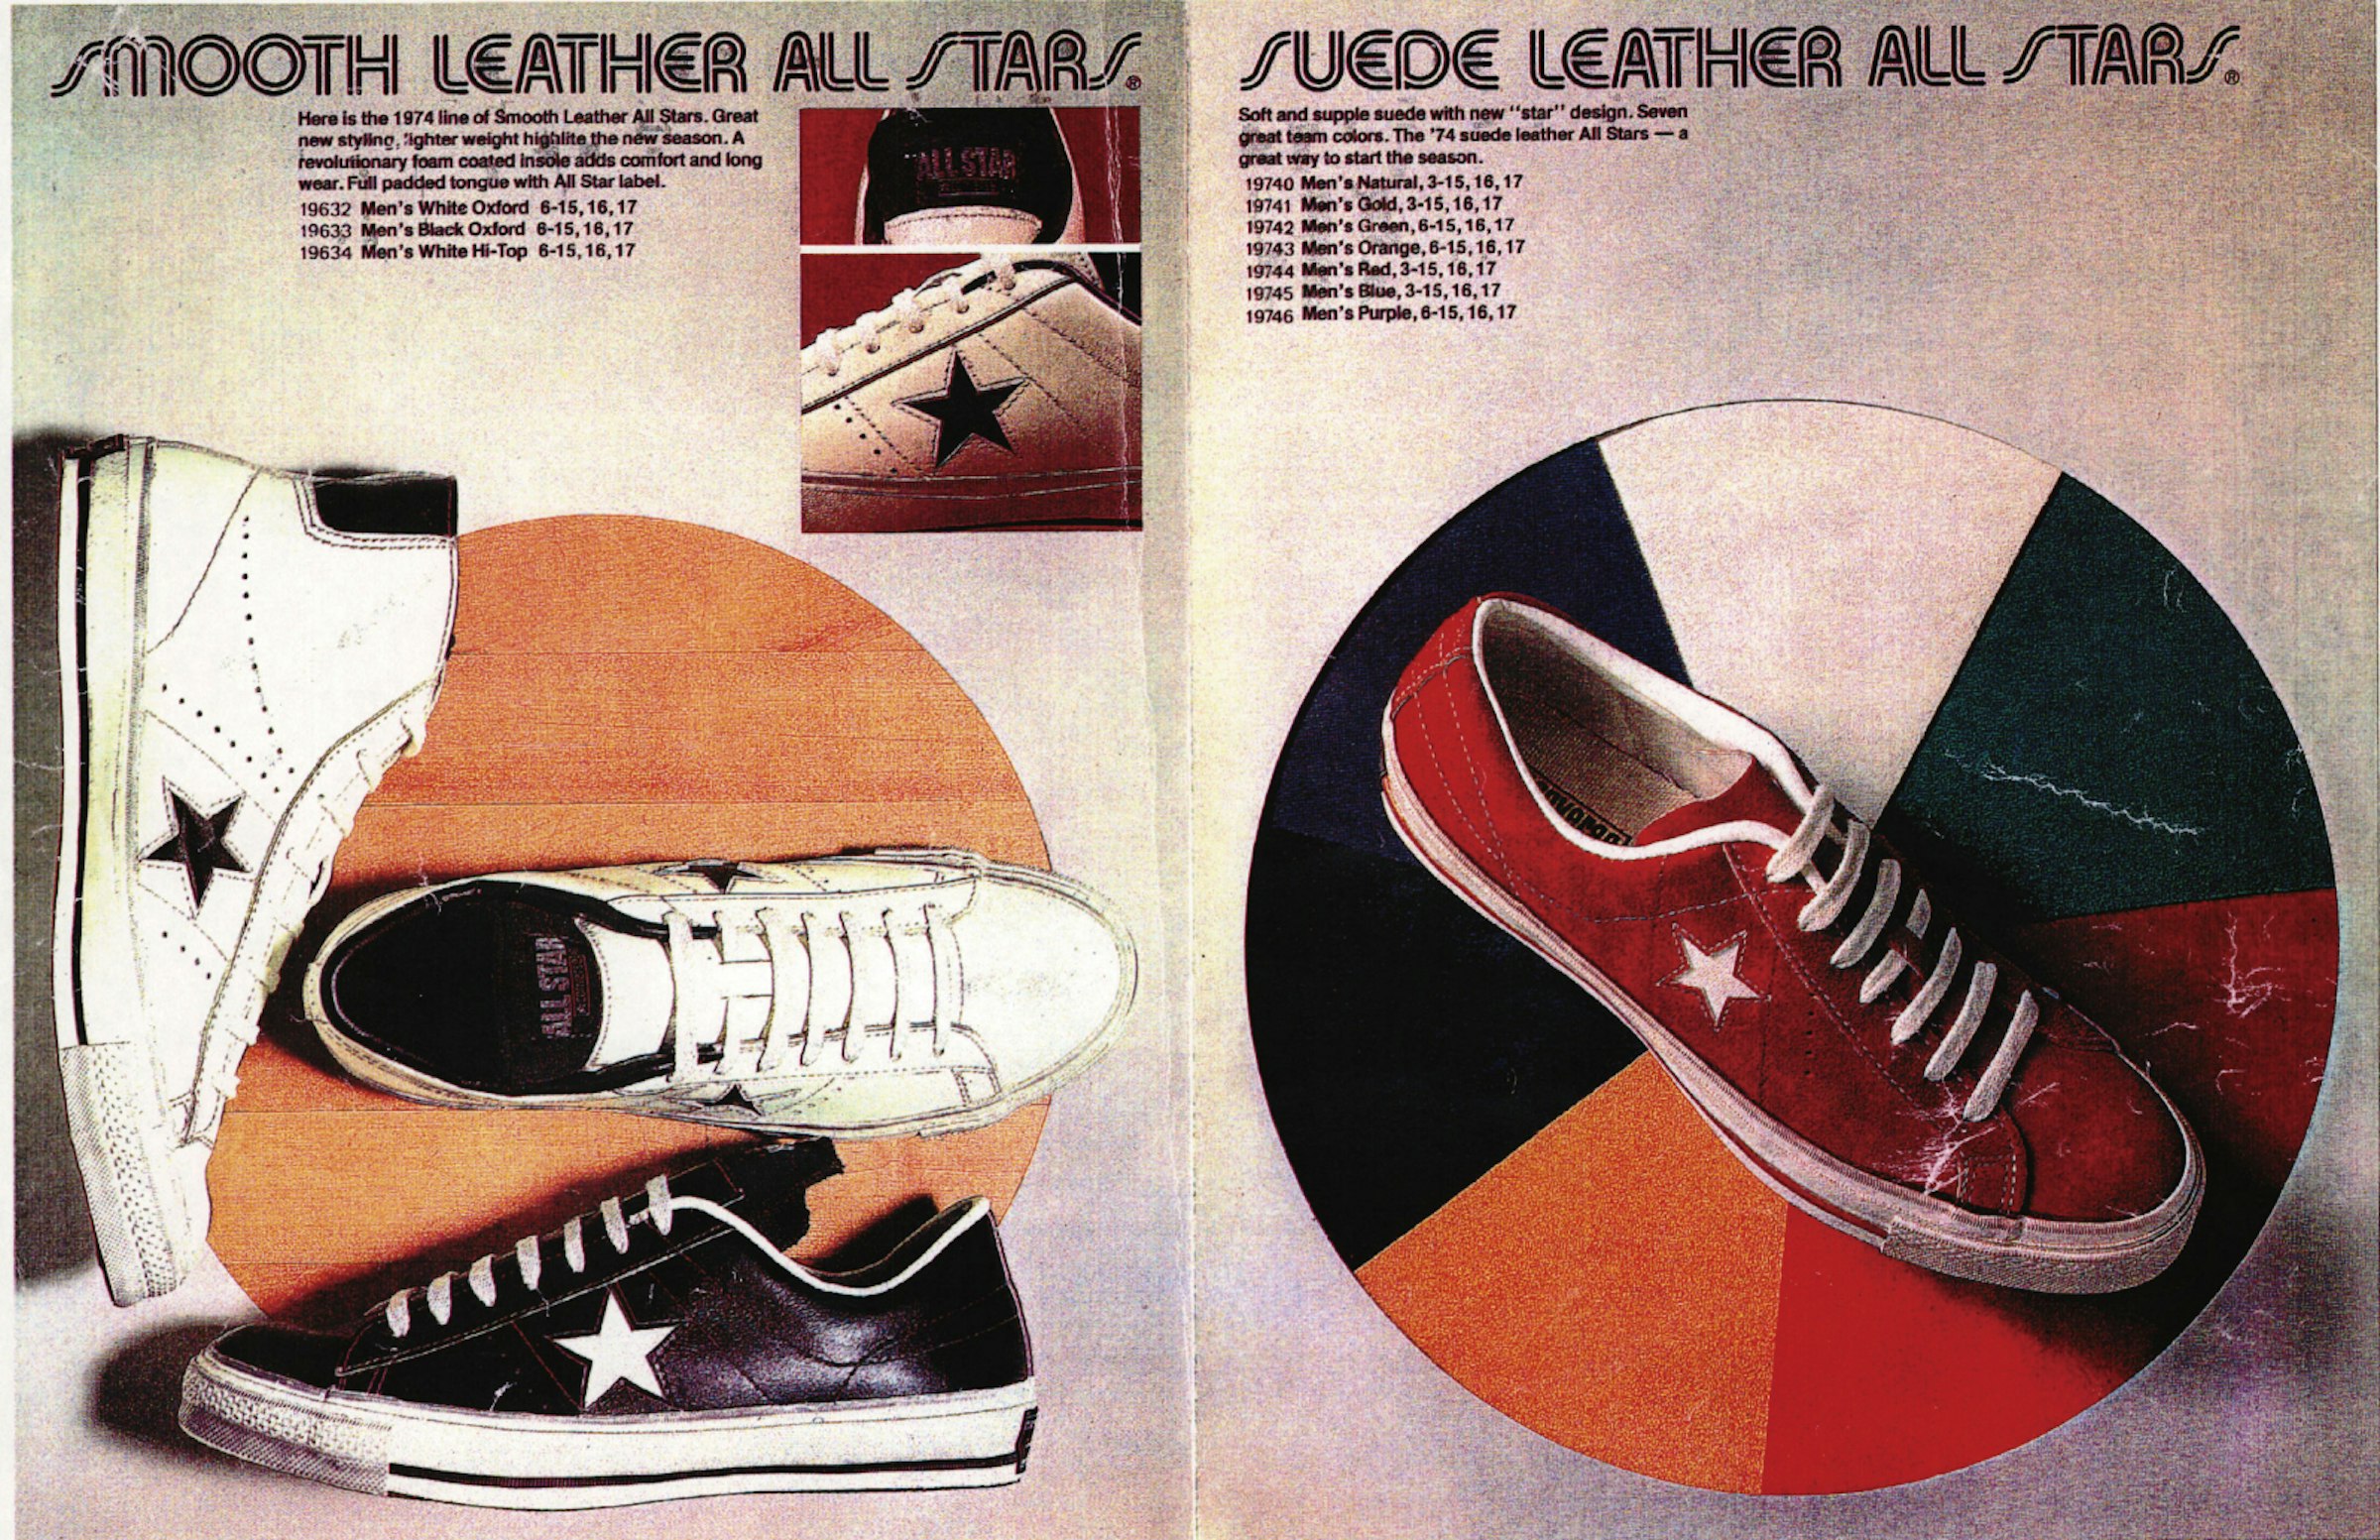 Catalog from 1974 when 'ONE STAR' was first introduced. At that time, smooth leather and suede basketball shoes were the mainstream.